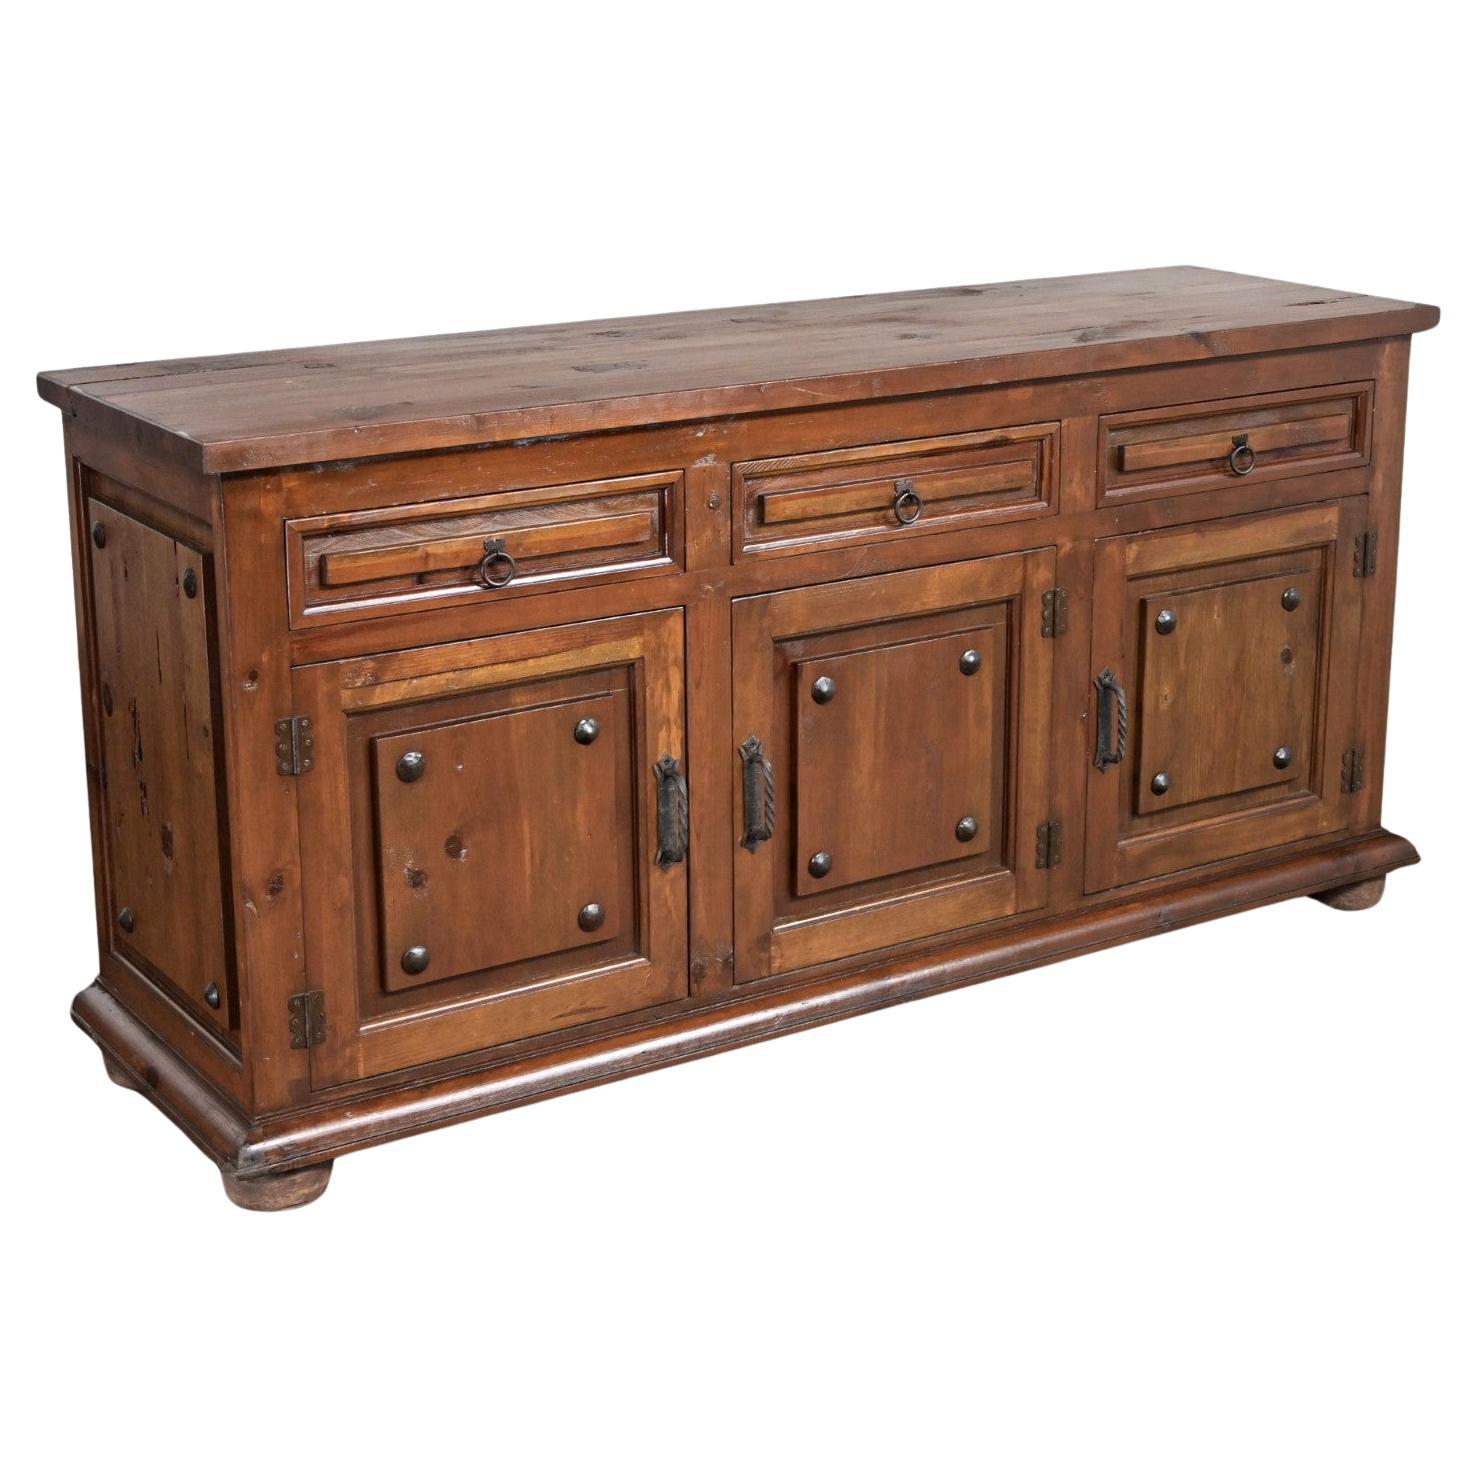 Spanish Revival Rustic Solid Pine Sideboard Style of Artes De Mexico Intern'tnl 